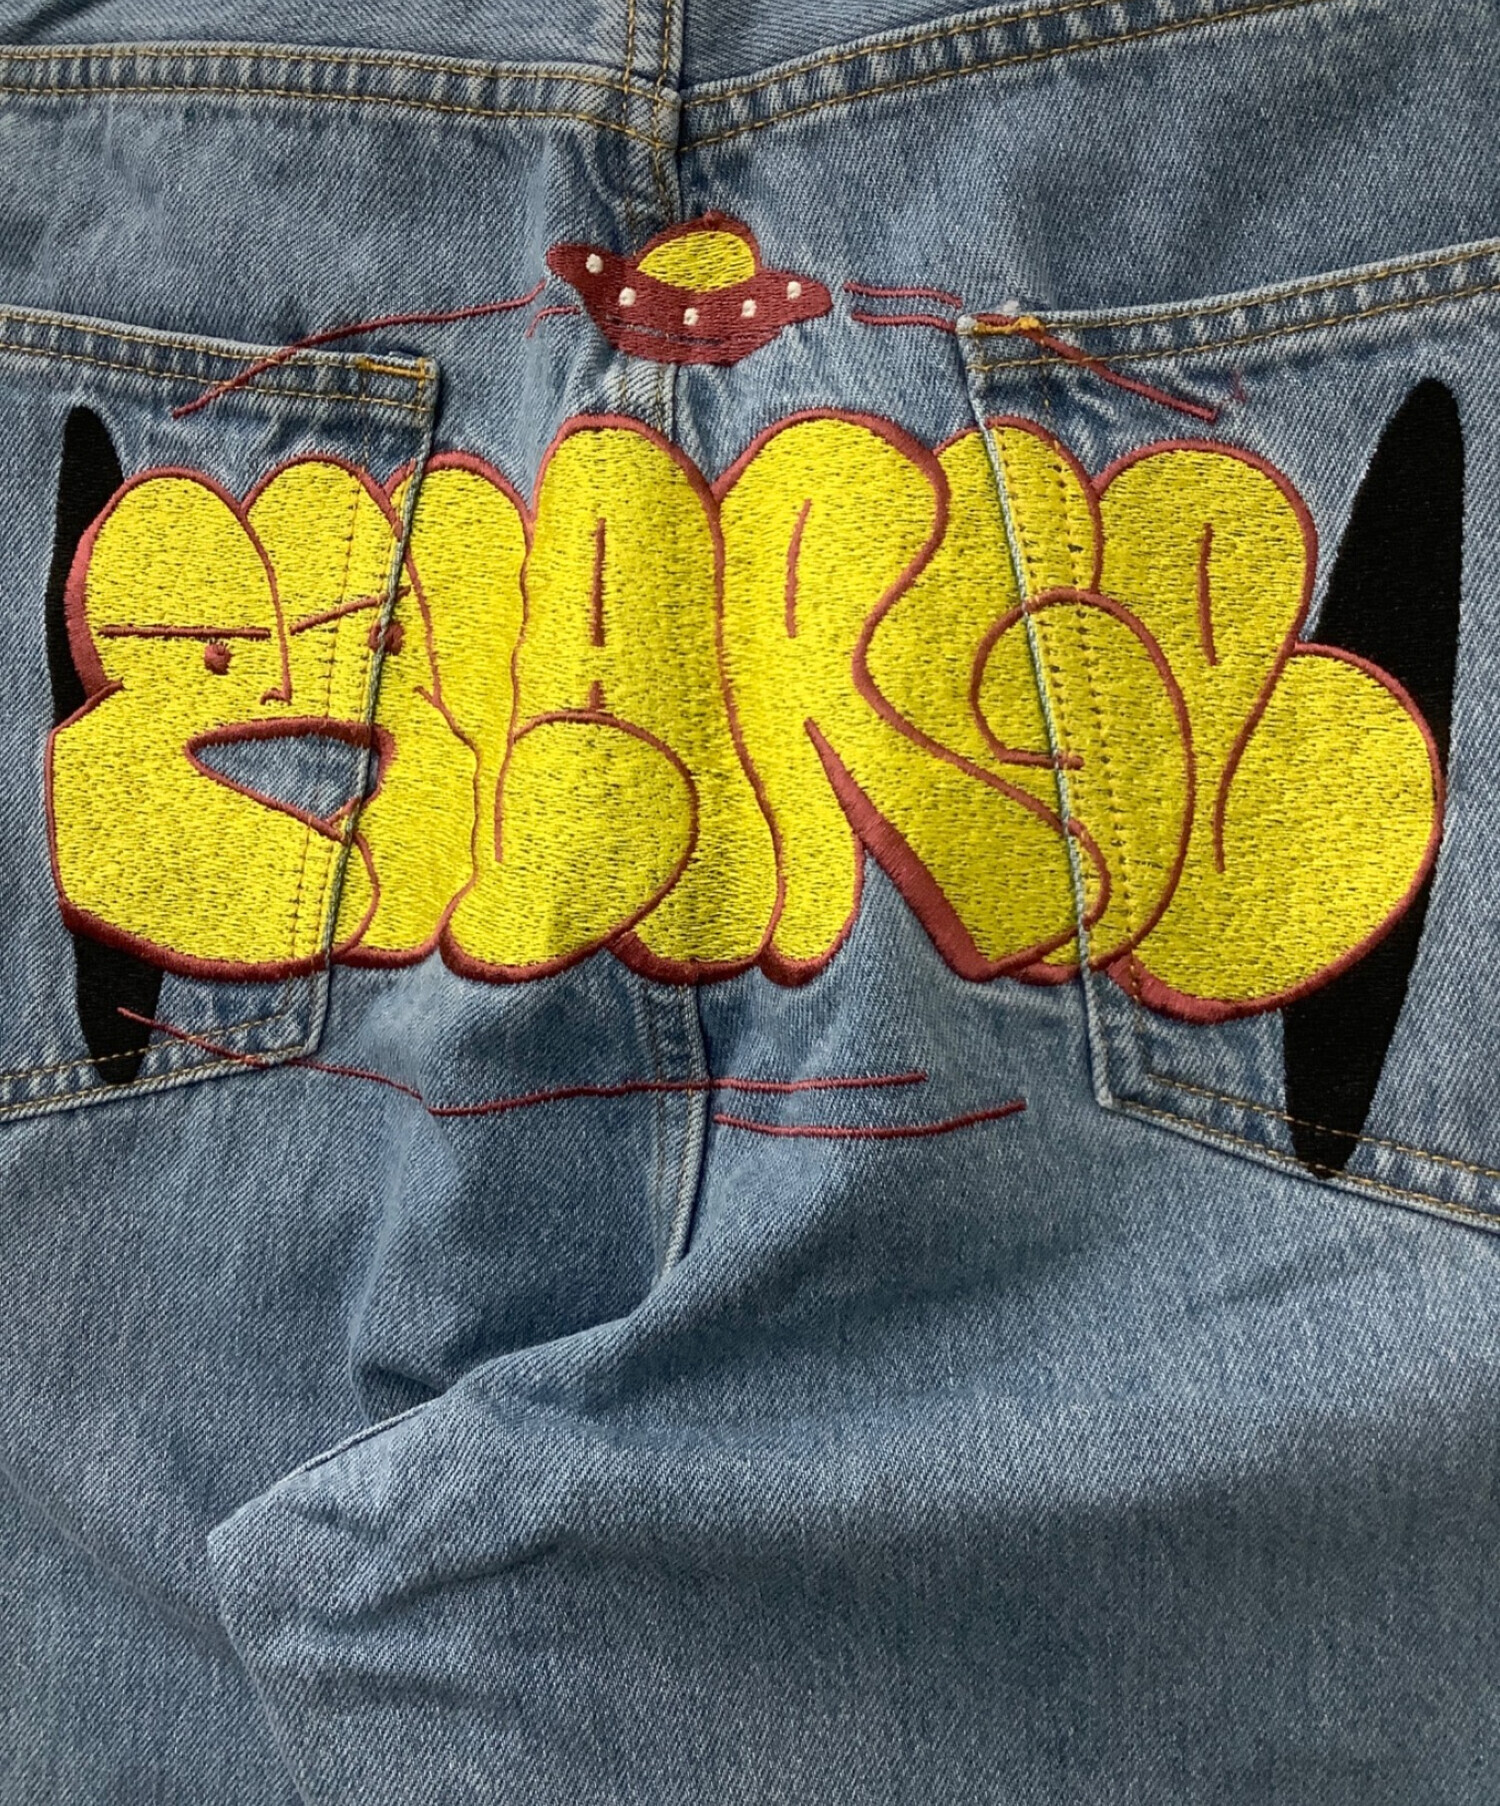 CUFFXLARGExTOM AND JERRY DENIM PANTS  36